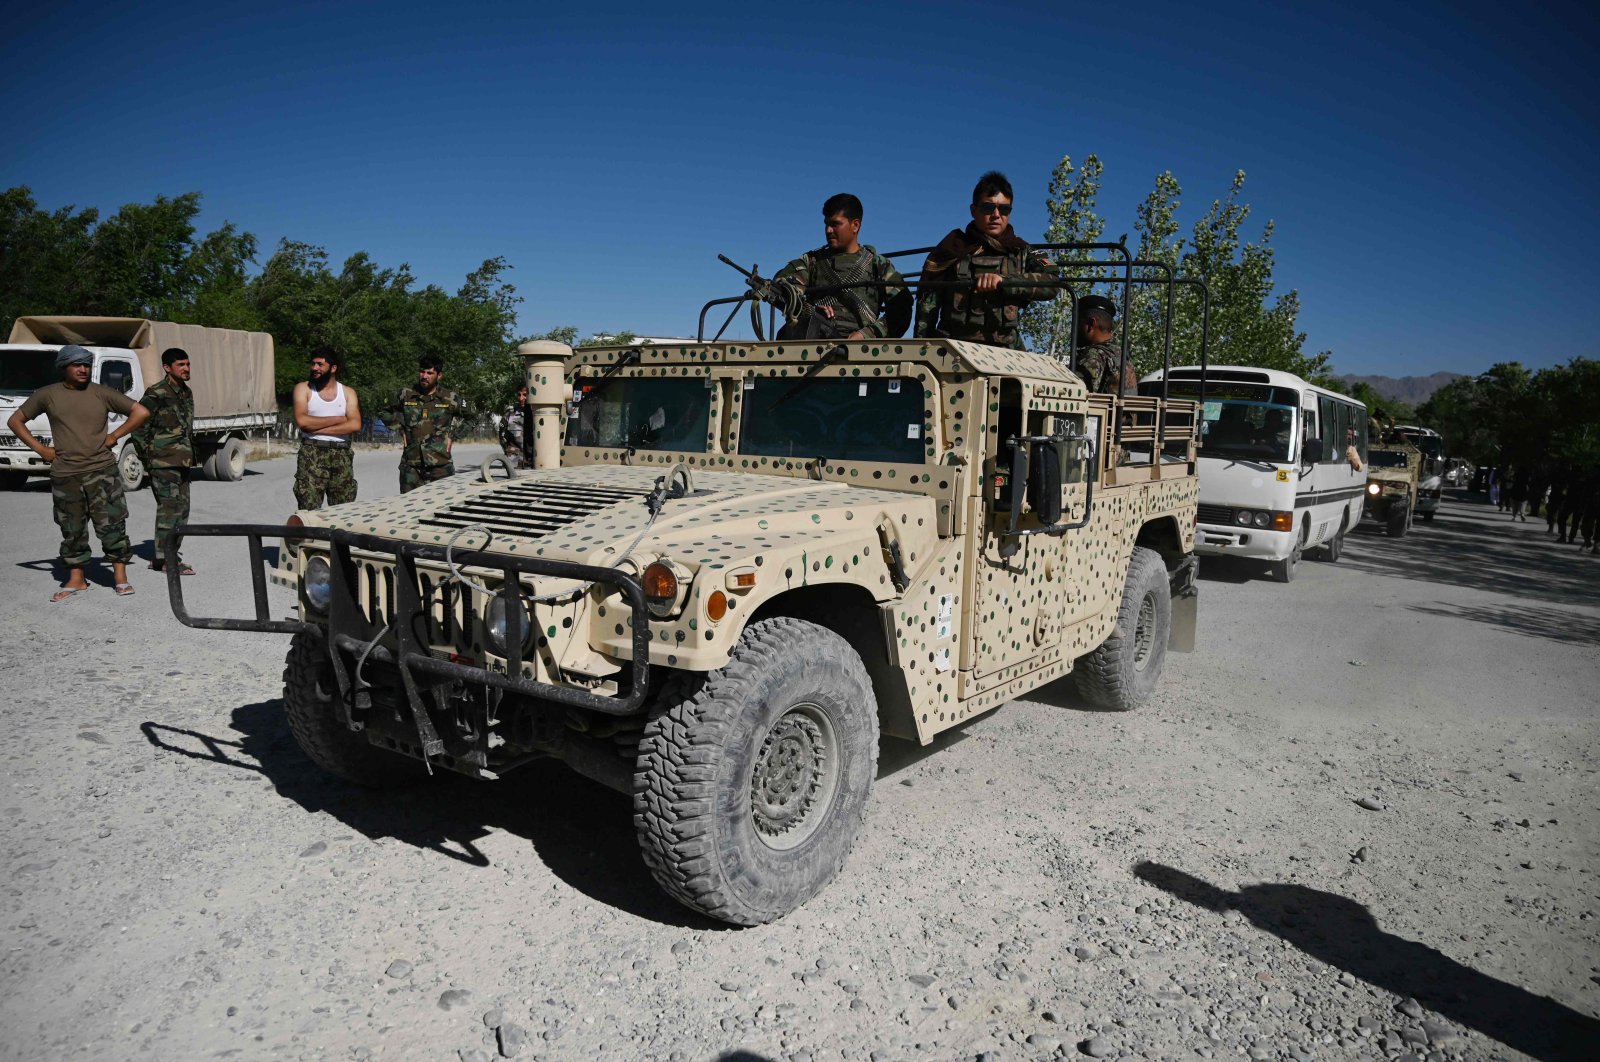 Afghan National Army (ANA) soldier escorts Taliban prisoners convoy during their release from the Bagram prison, in outside of the US military base in Bagram, some 50 km north of Kabul on May 26, 2020. (AFP Photo)